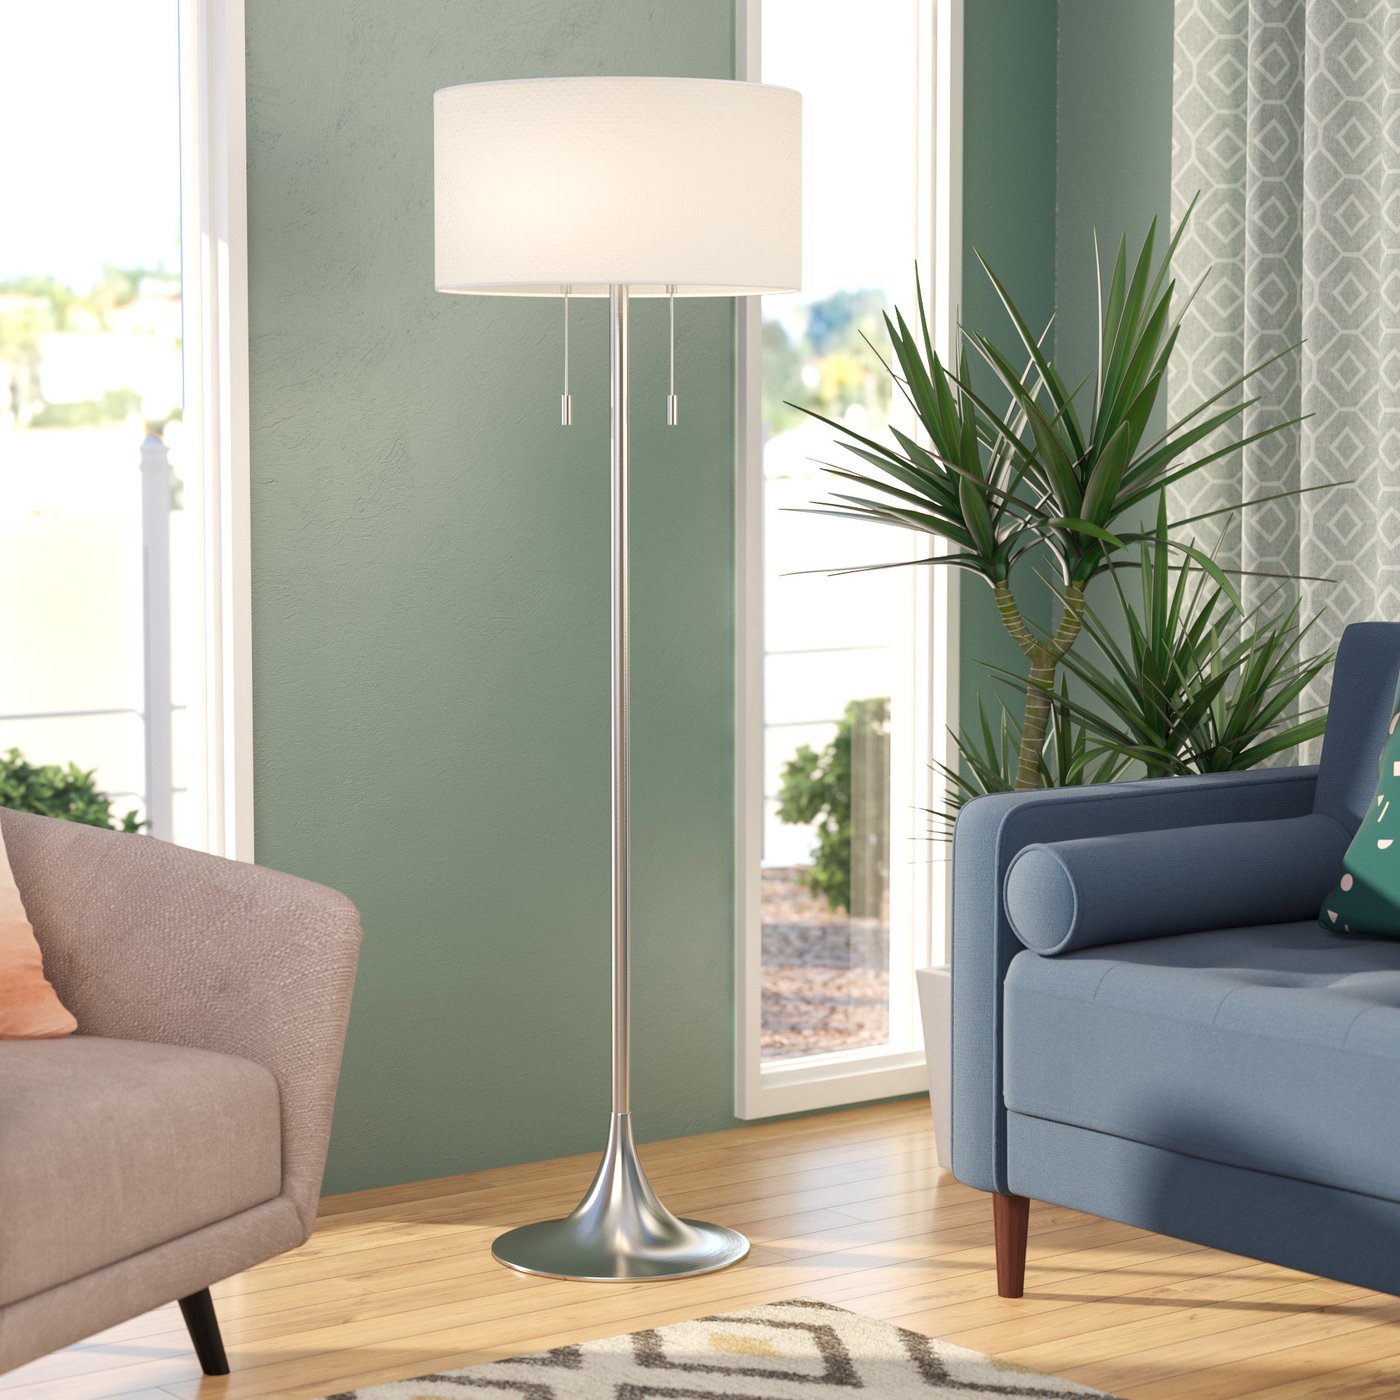 How to Choose a Floor Lamp - Foter